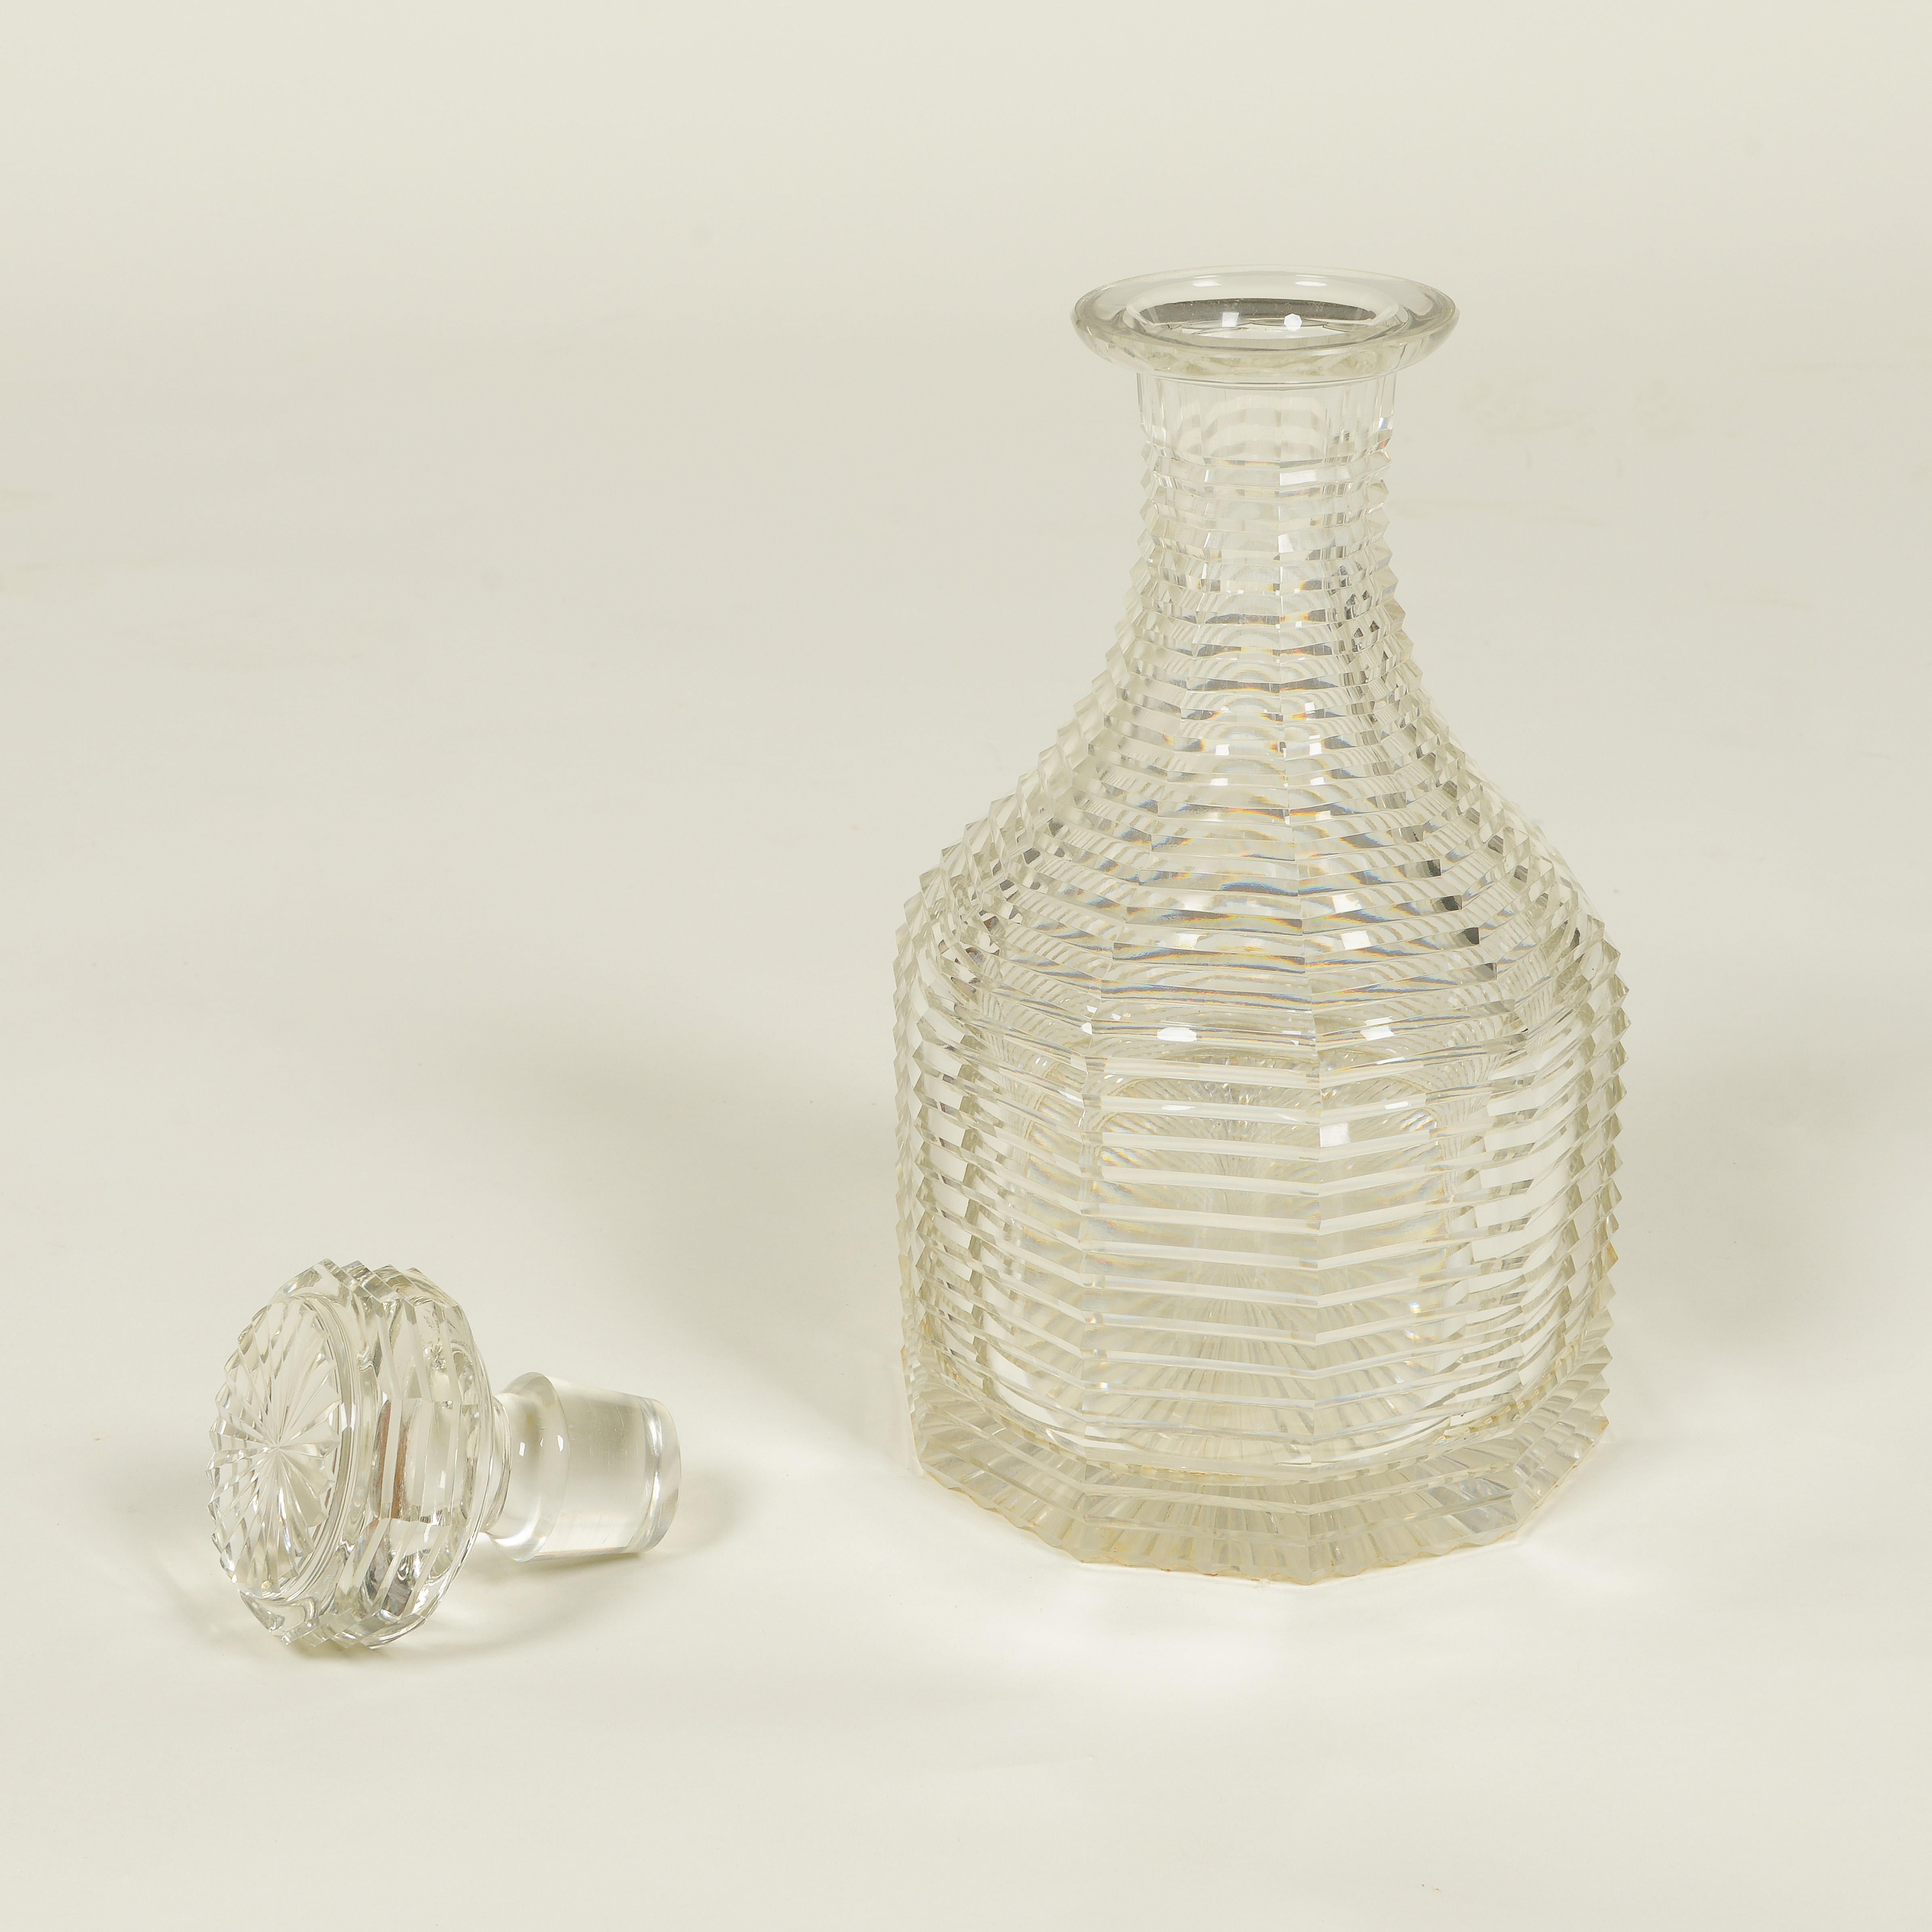 19th Century English Cut Crystal Decanter For Sale